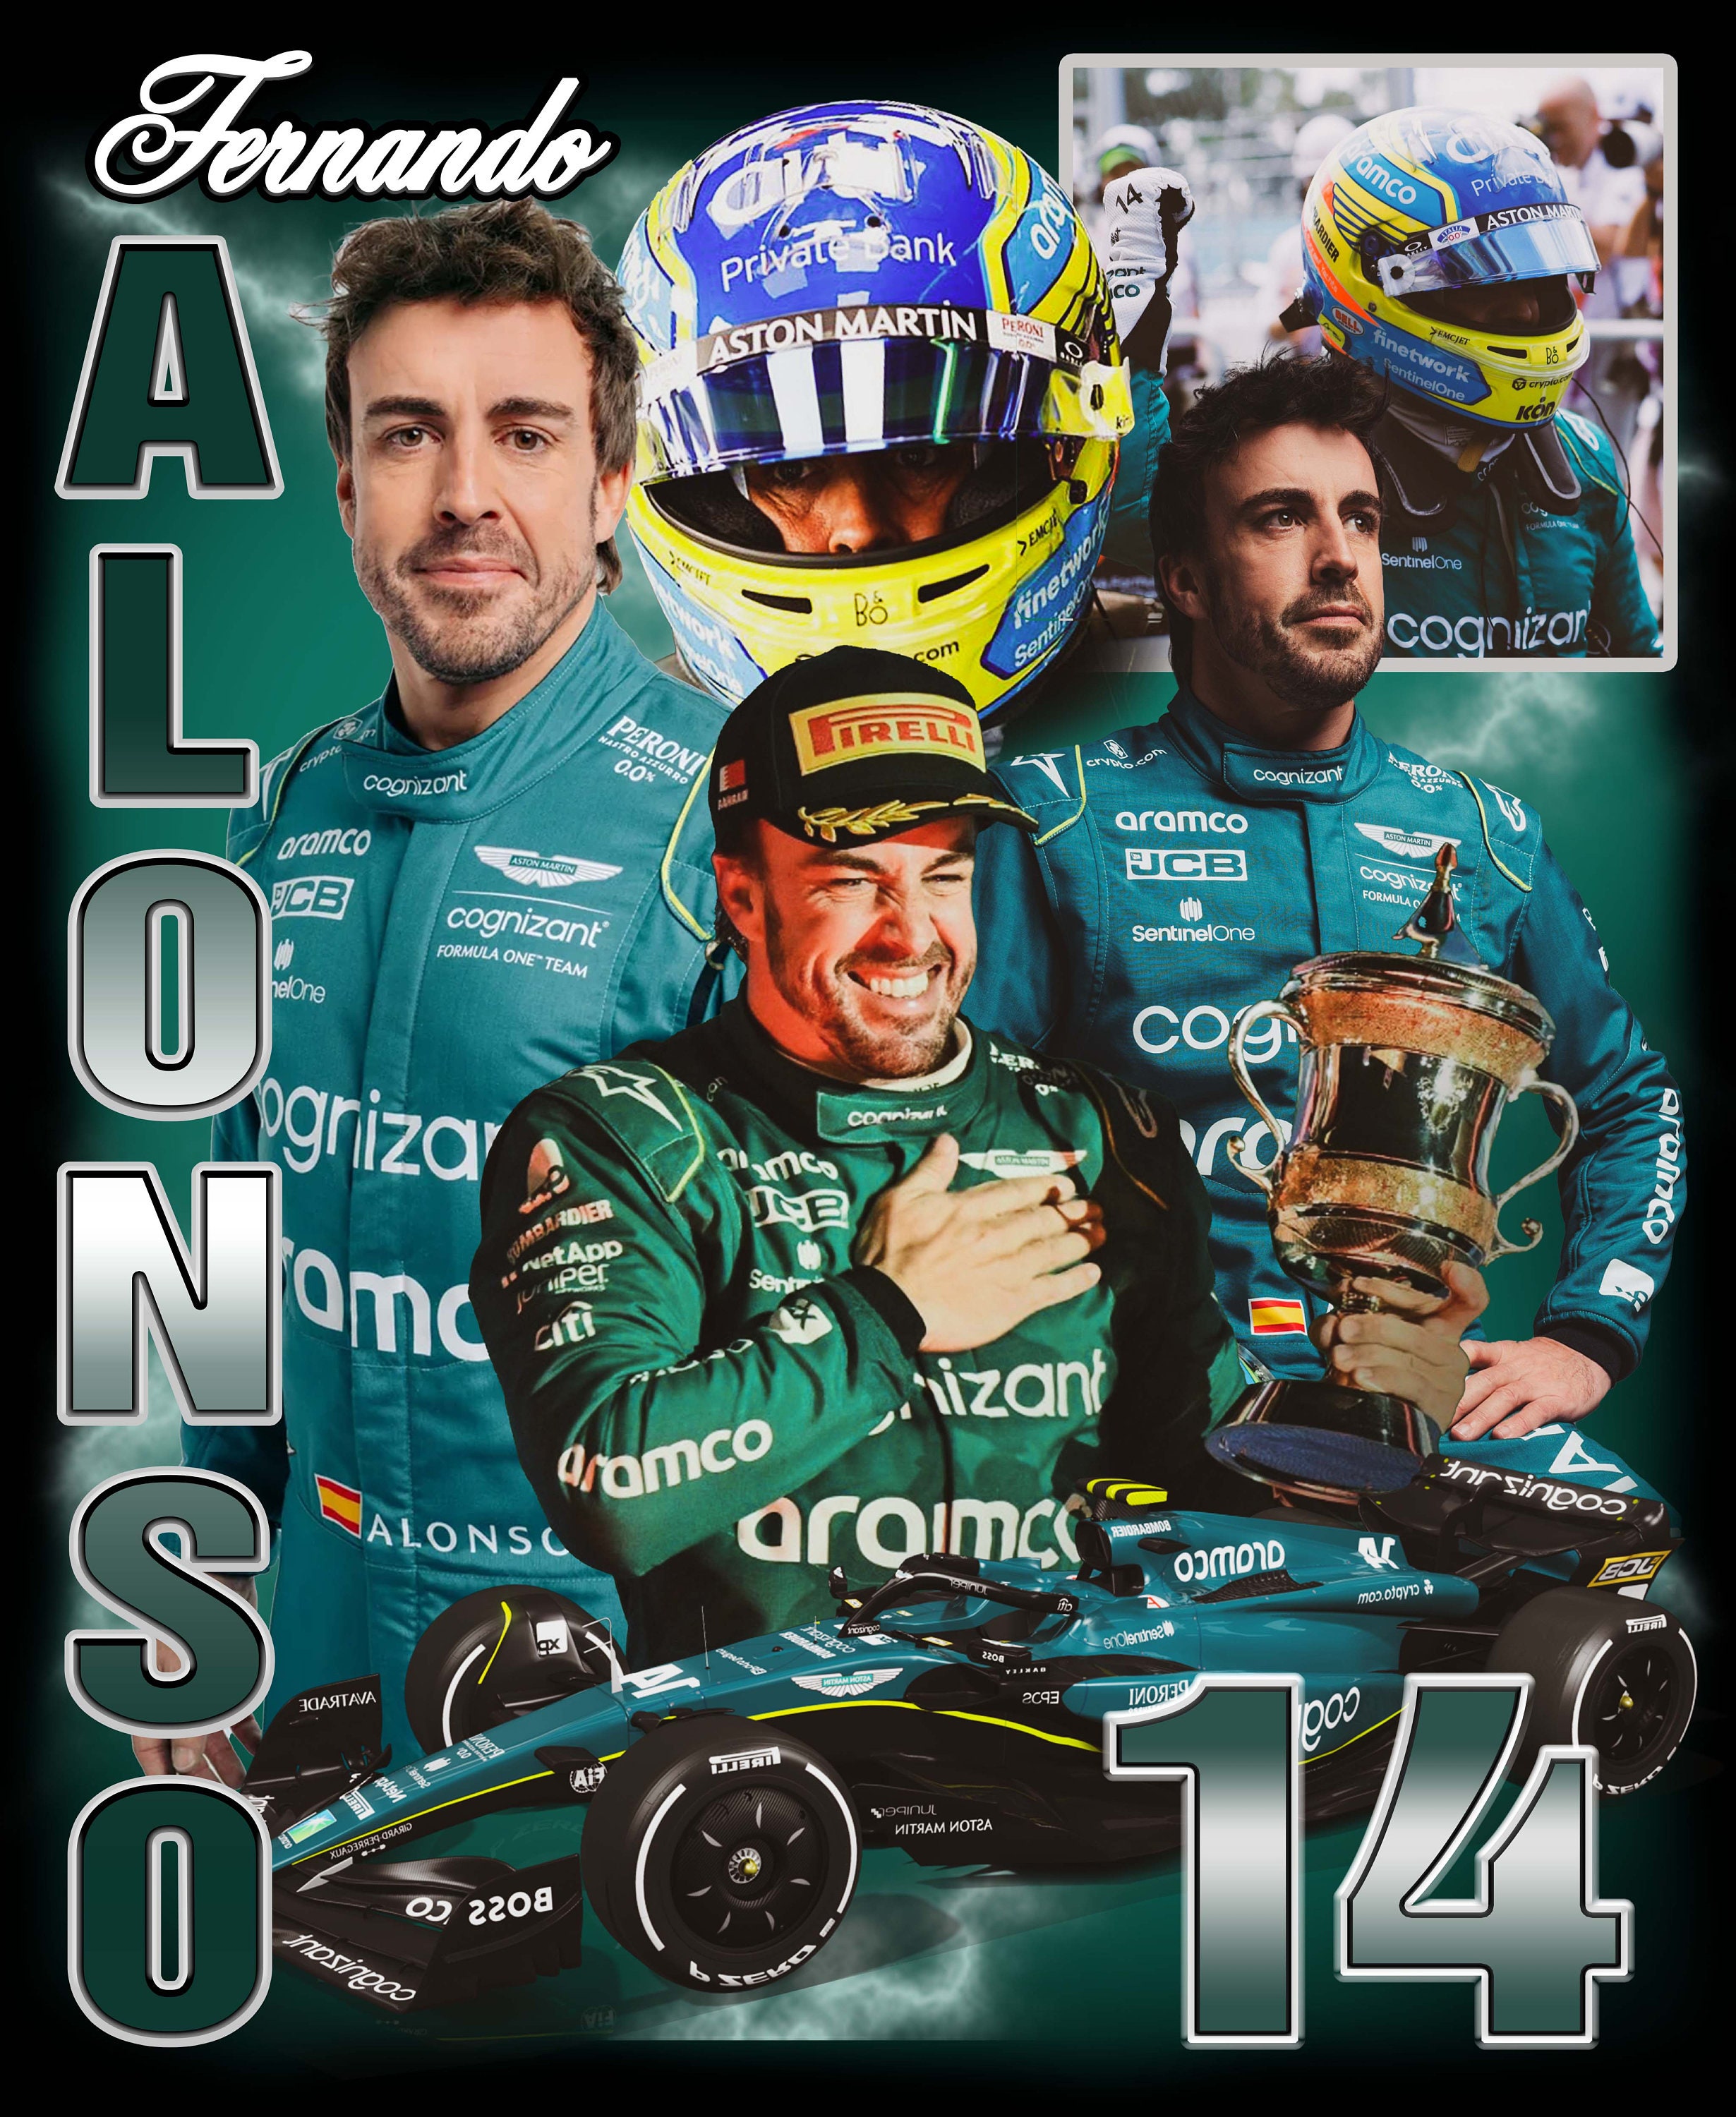  Fernando Alonso Poster 63 Wall Art Canvas Print Poster Home  Bathroom Bedroom Office Living Room Decor Canvas Poster  Frame：12x18inch(30x45cm): Posters & Prints